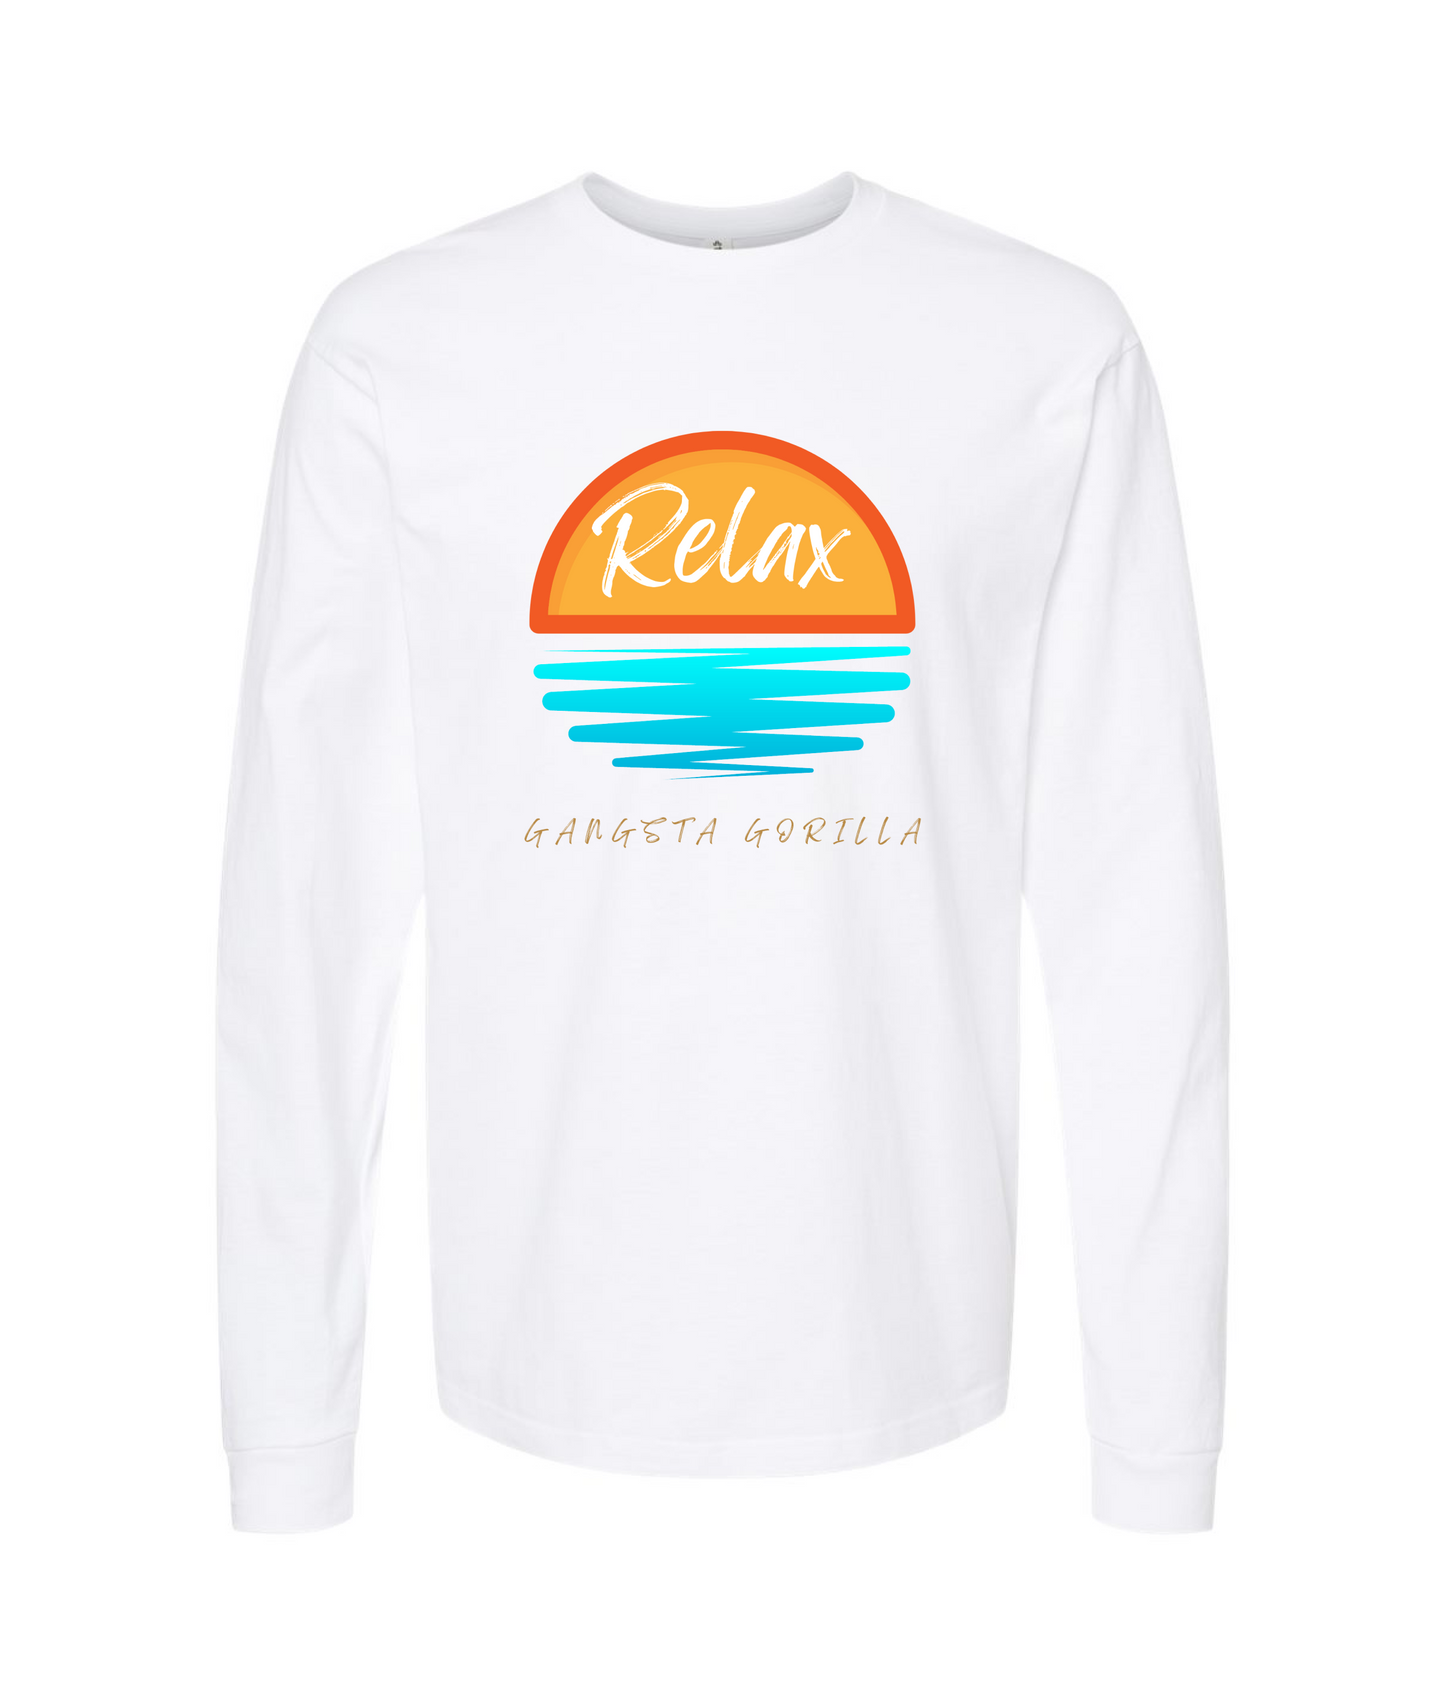 Gangsta Gorilla Extracts and Apparel - RELAX - White Long Sleeve T